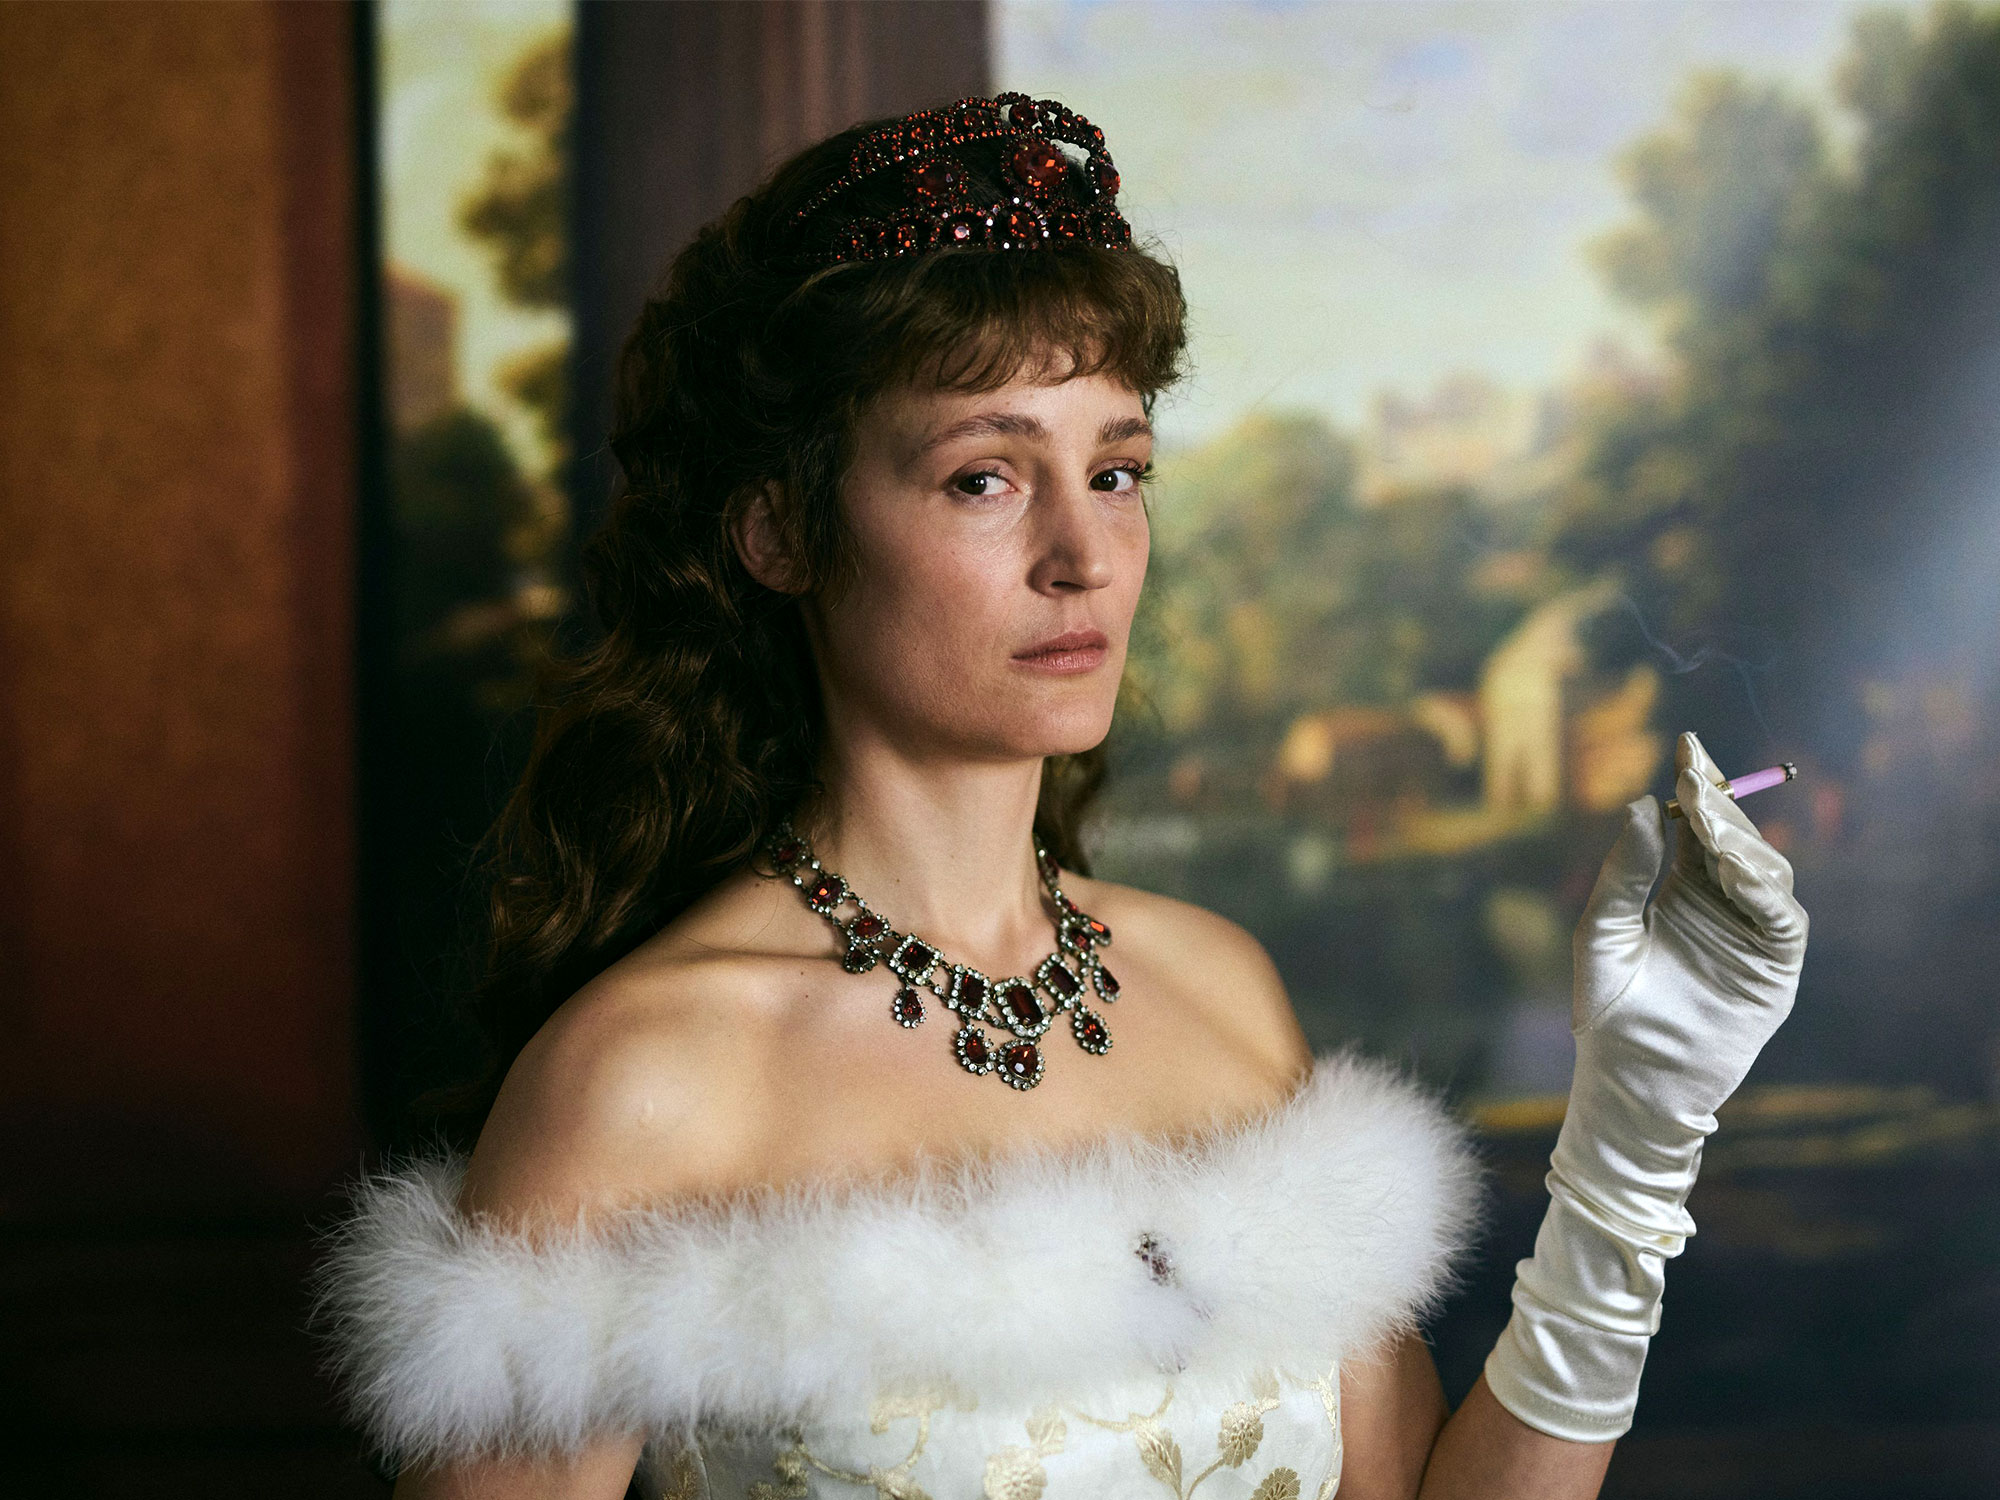 Corsage review – a brilliantly crafted portrait of a woman